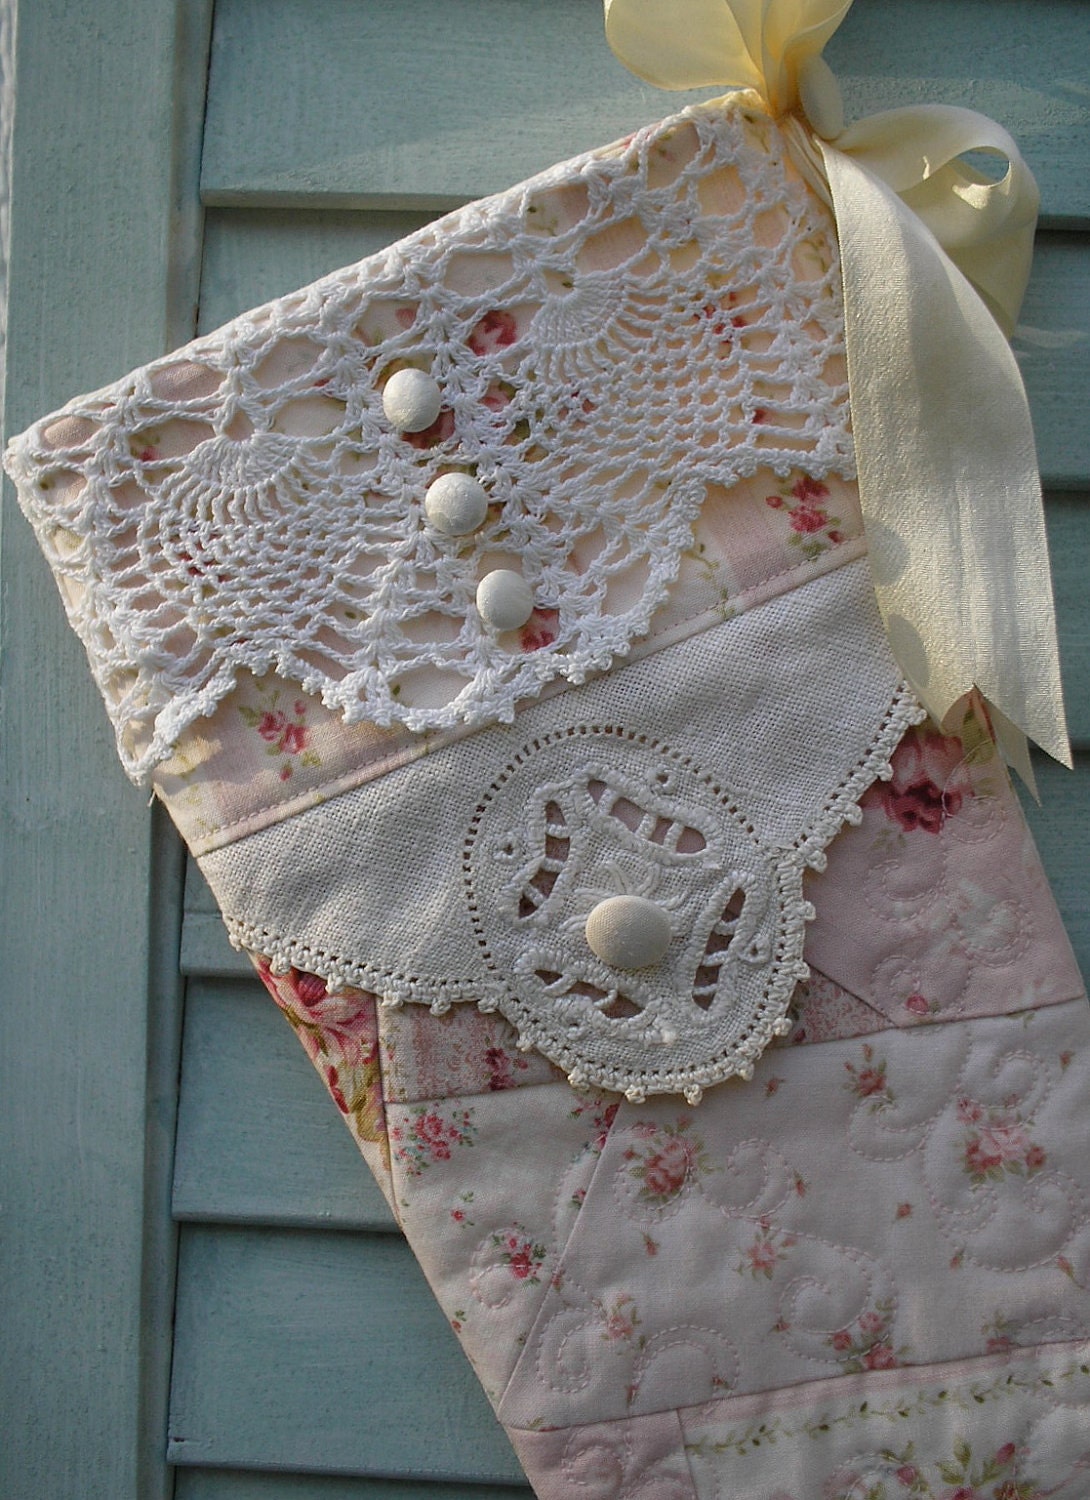 Reserved for Kristen - Pink Christmas Stocking, Quilted Rose Patchwork, Shabby Chic, Vintage Crochet and Embellishments